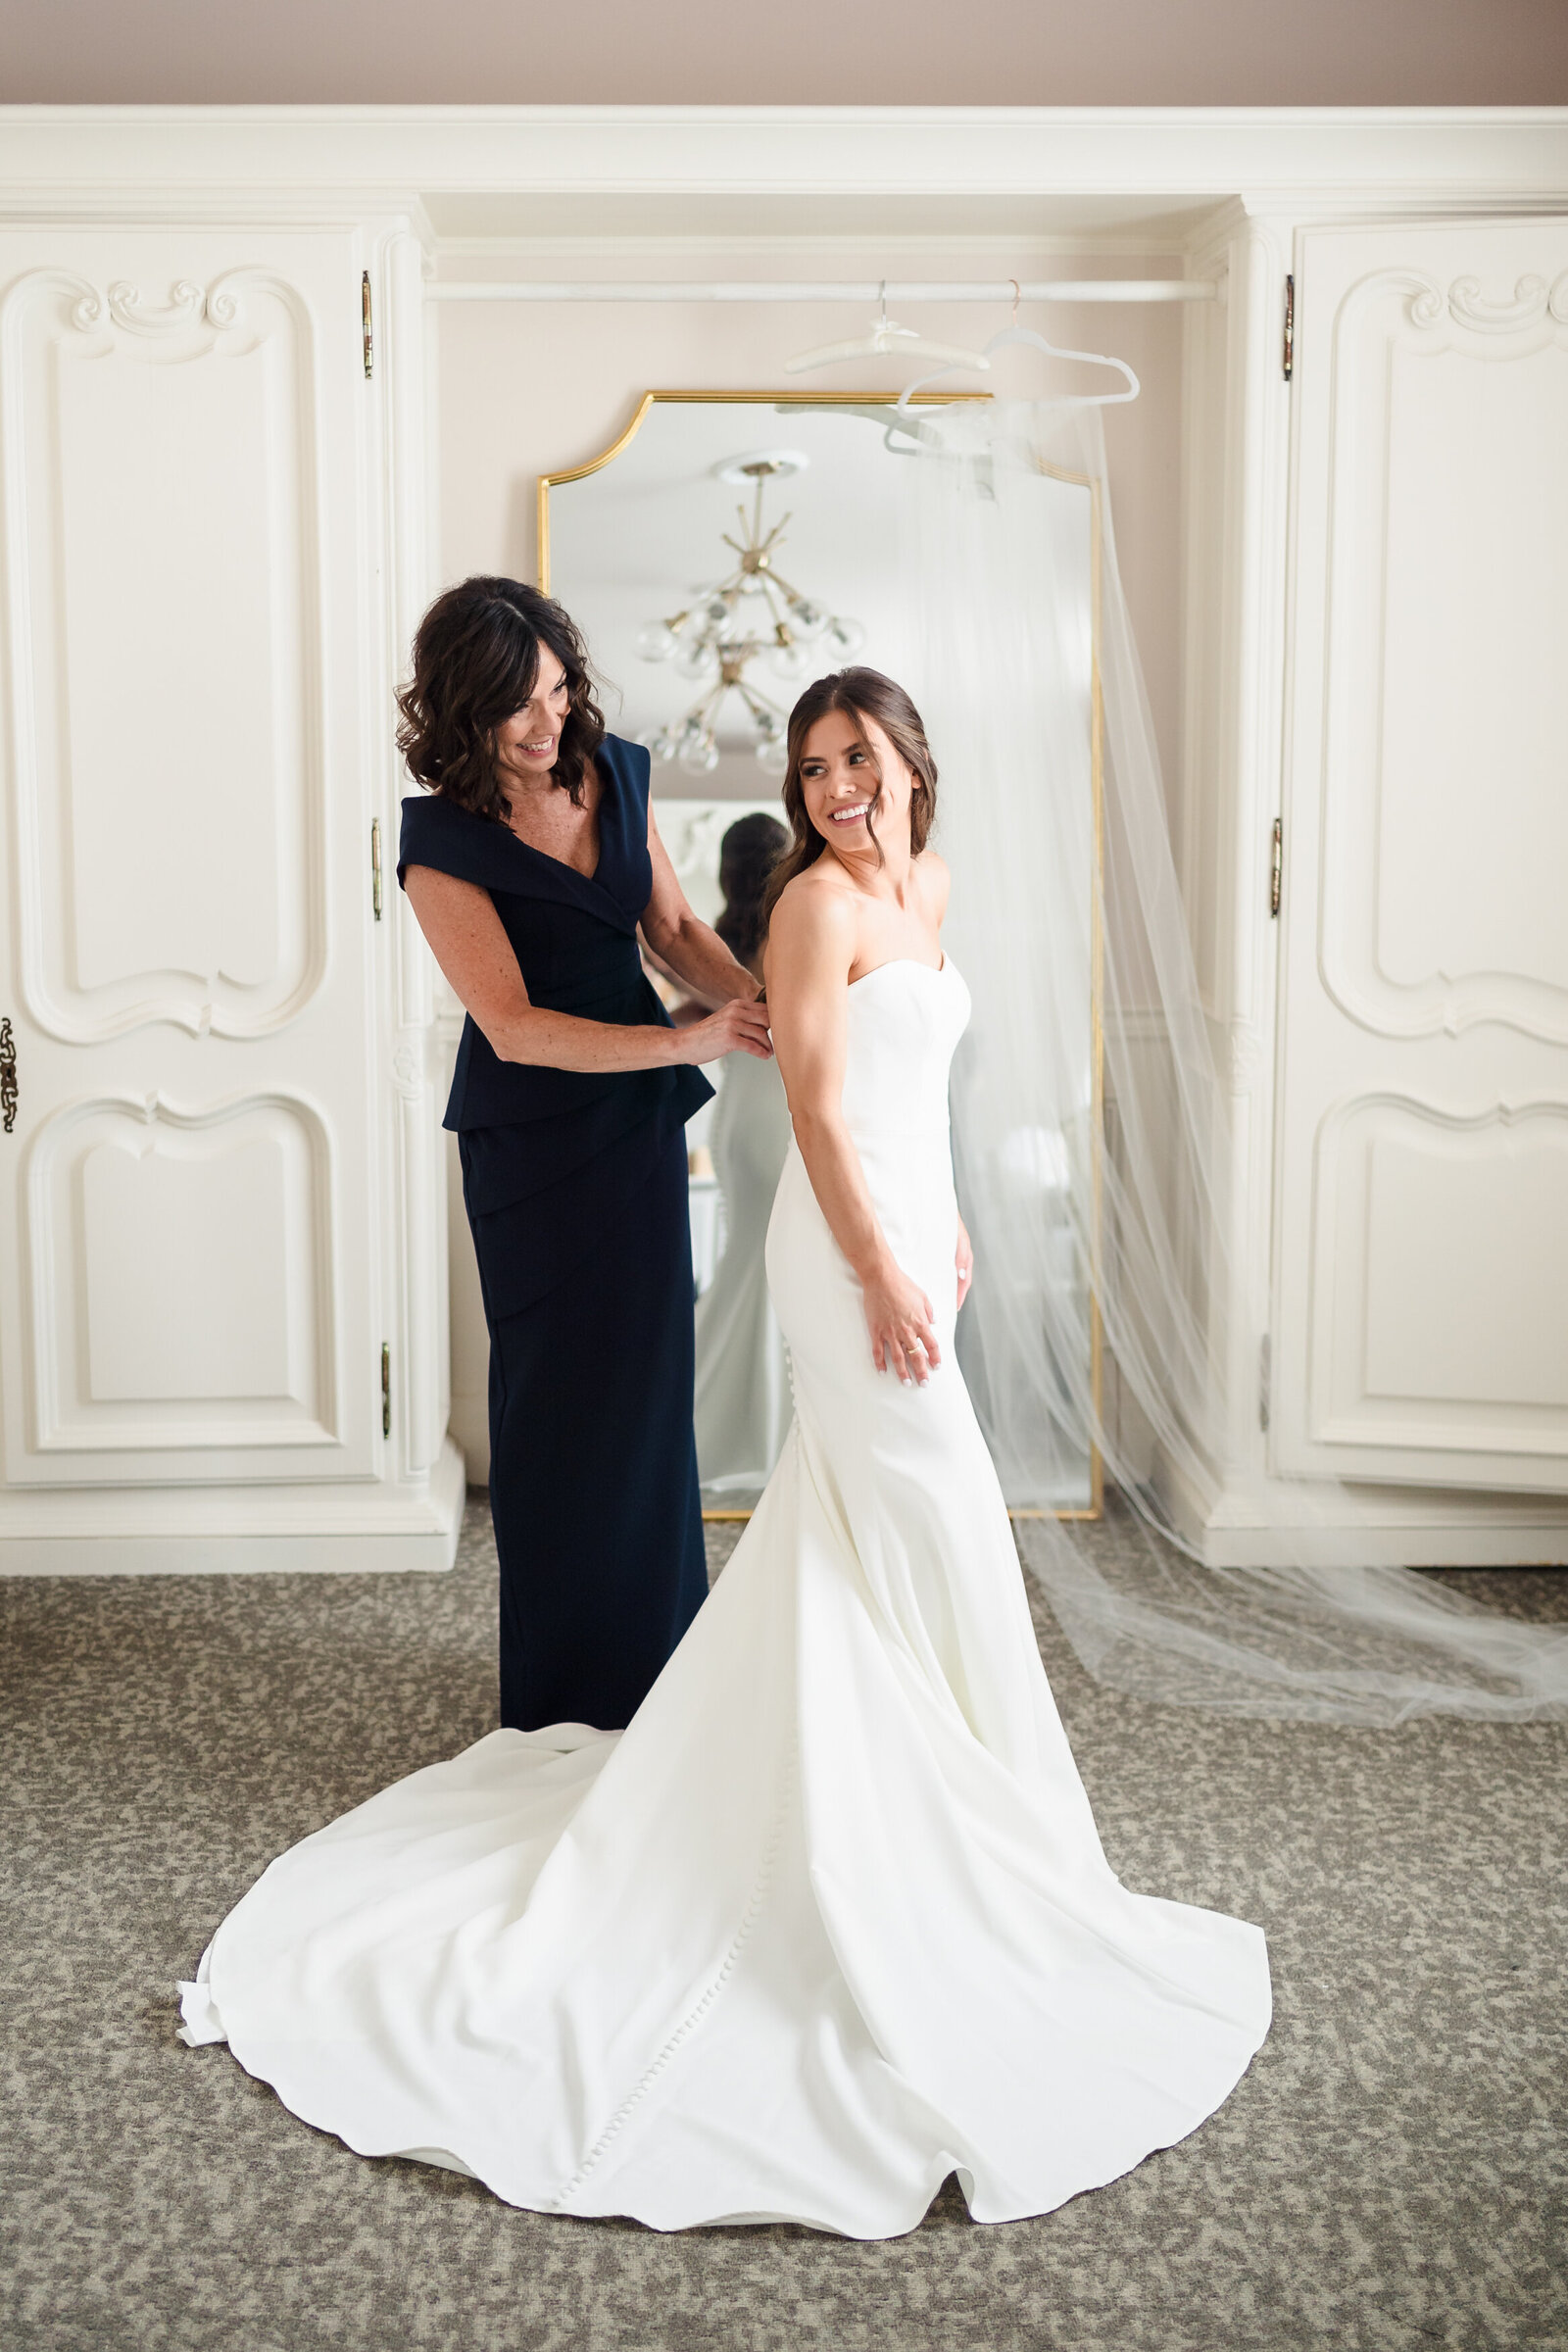 The mother of the bride helps her daughter button her wedding dress inside the bride's suite at Pinnacle Golf Club